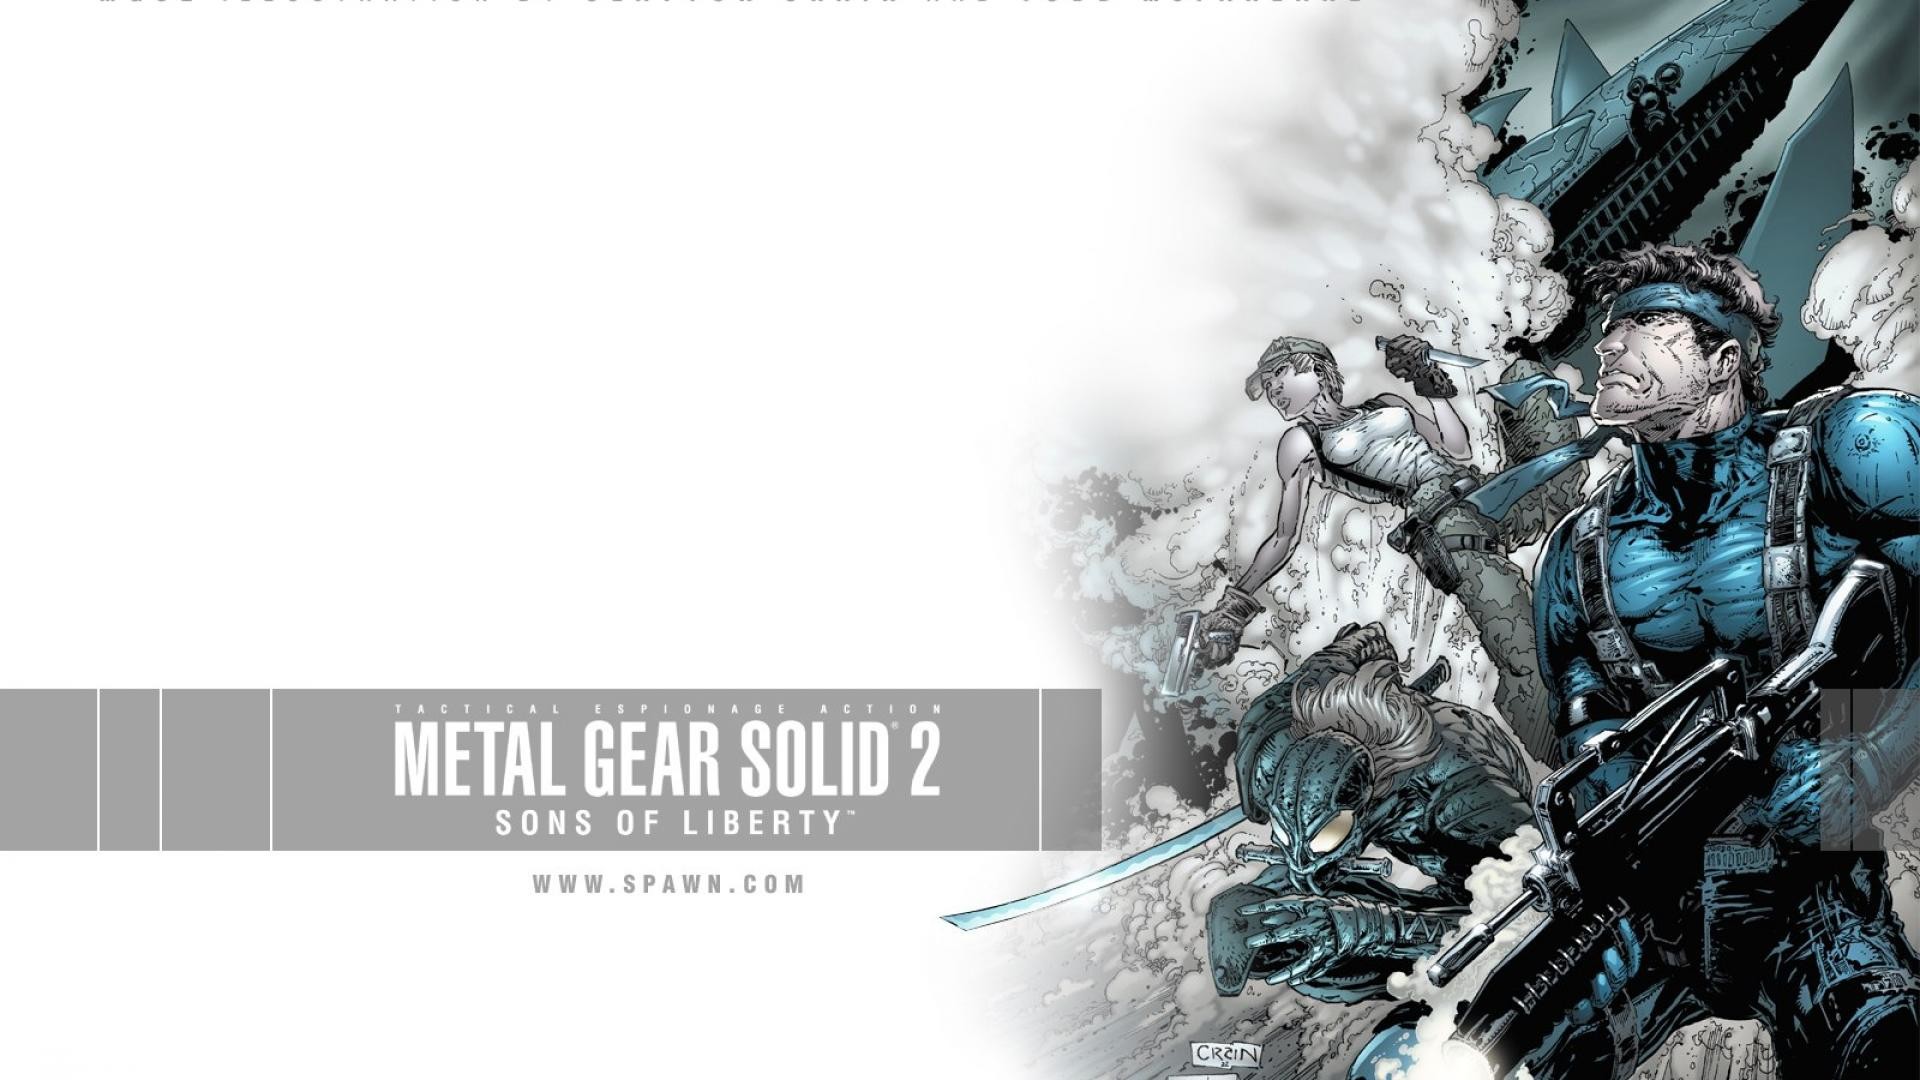 1920x1080 MGS METAL GEAR SOLID VIDEO GAMES SONS OF LIBERTY HD WALLPAPER (#14667)